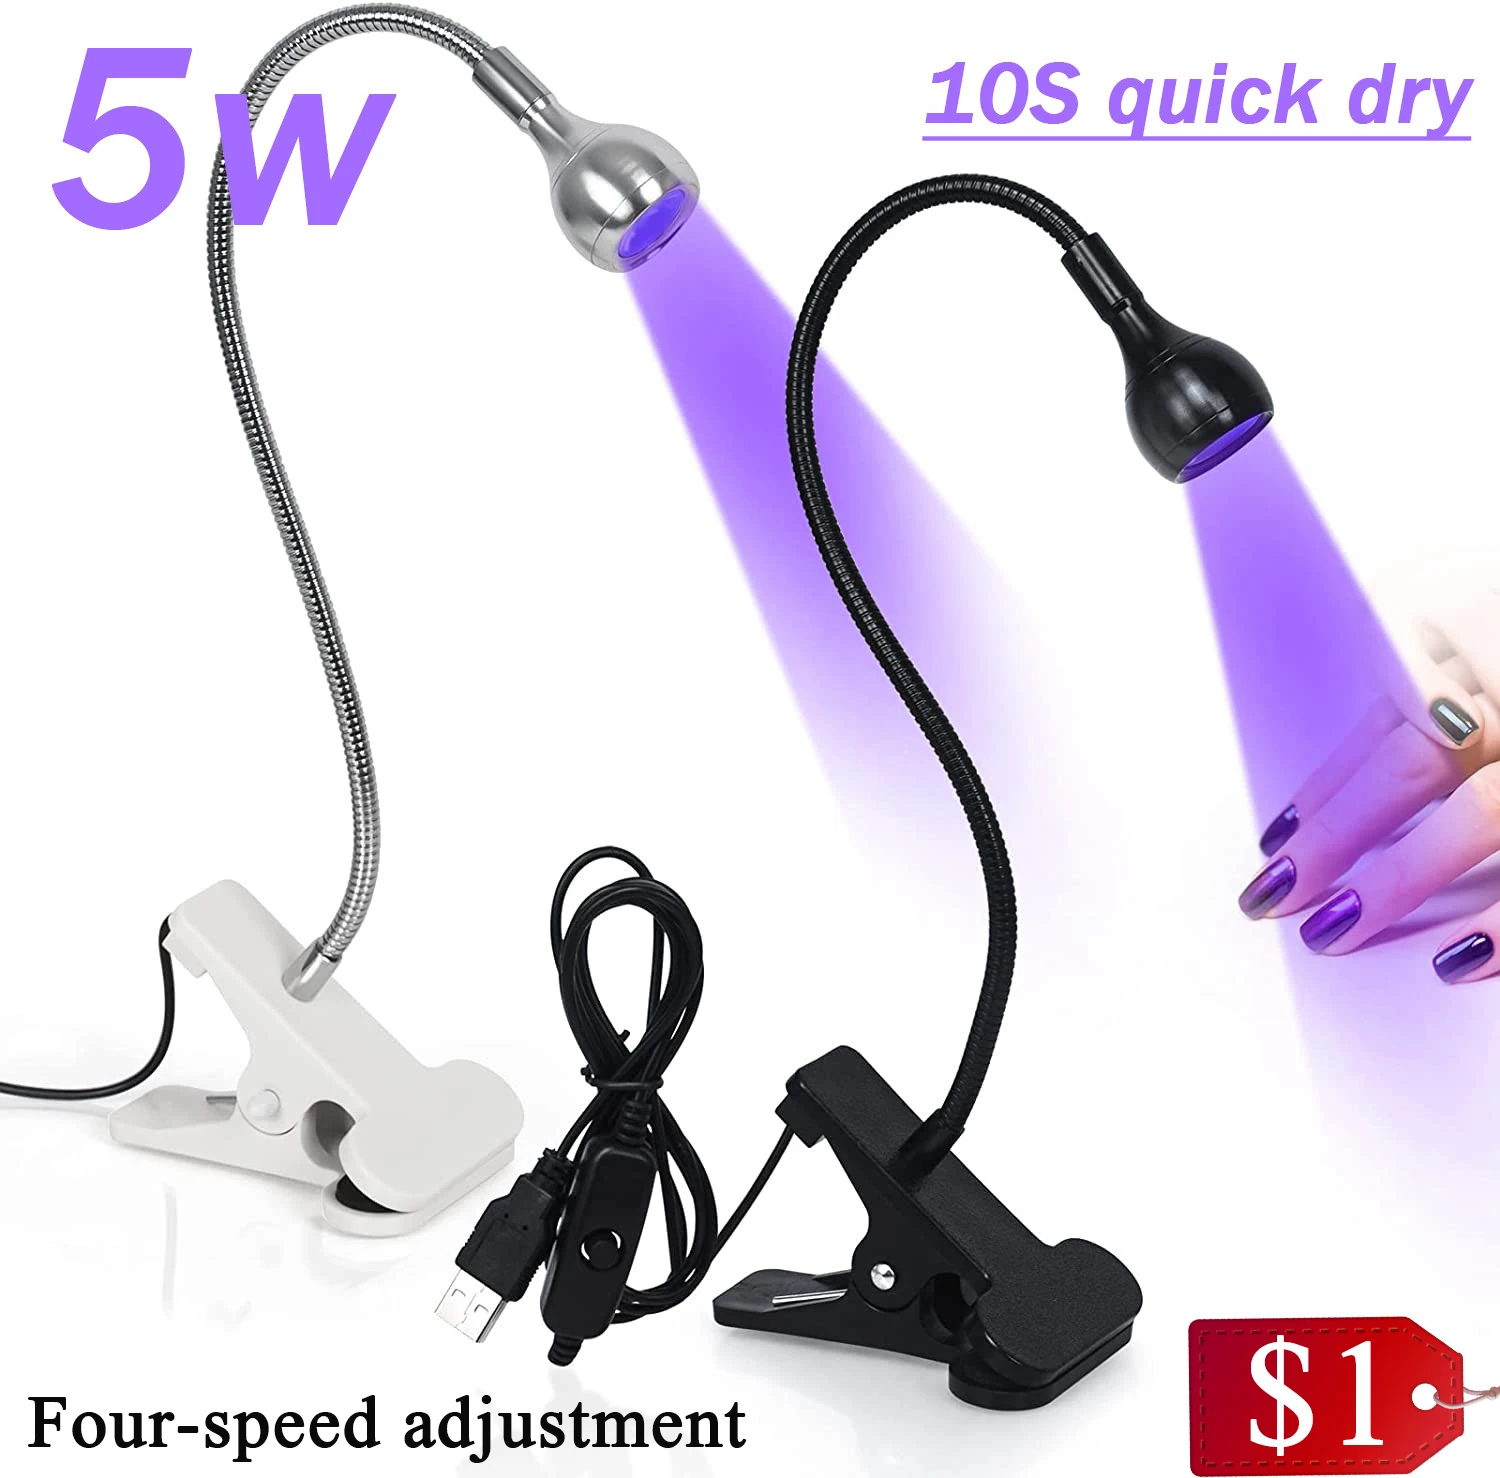 Mini Lampe UV Ongles Gel Pose Americaine Sèche Ongles Professionnel Lampe  UV LED Ongles USB Portables pour Vernis Semi Permanent Onglerie Machine a